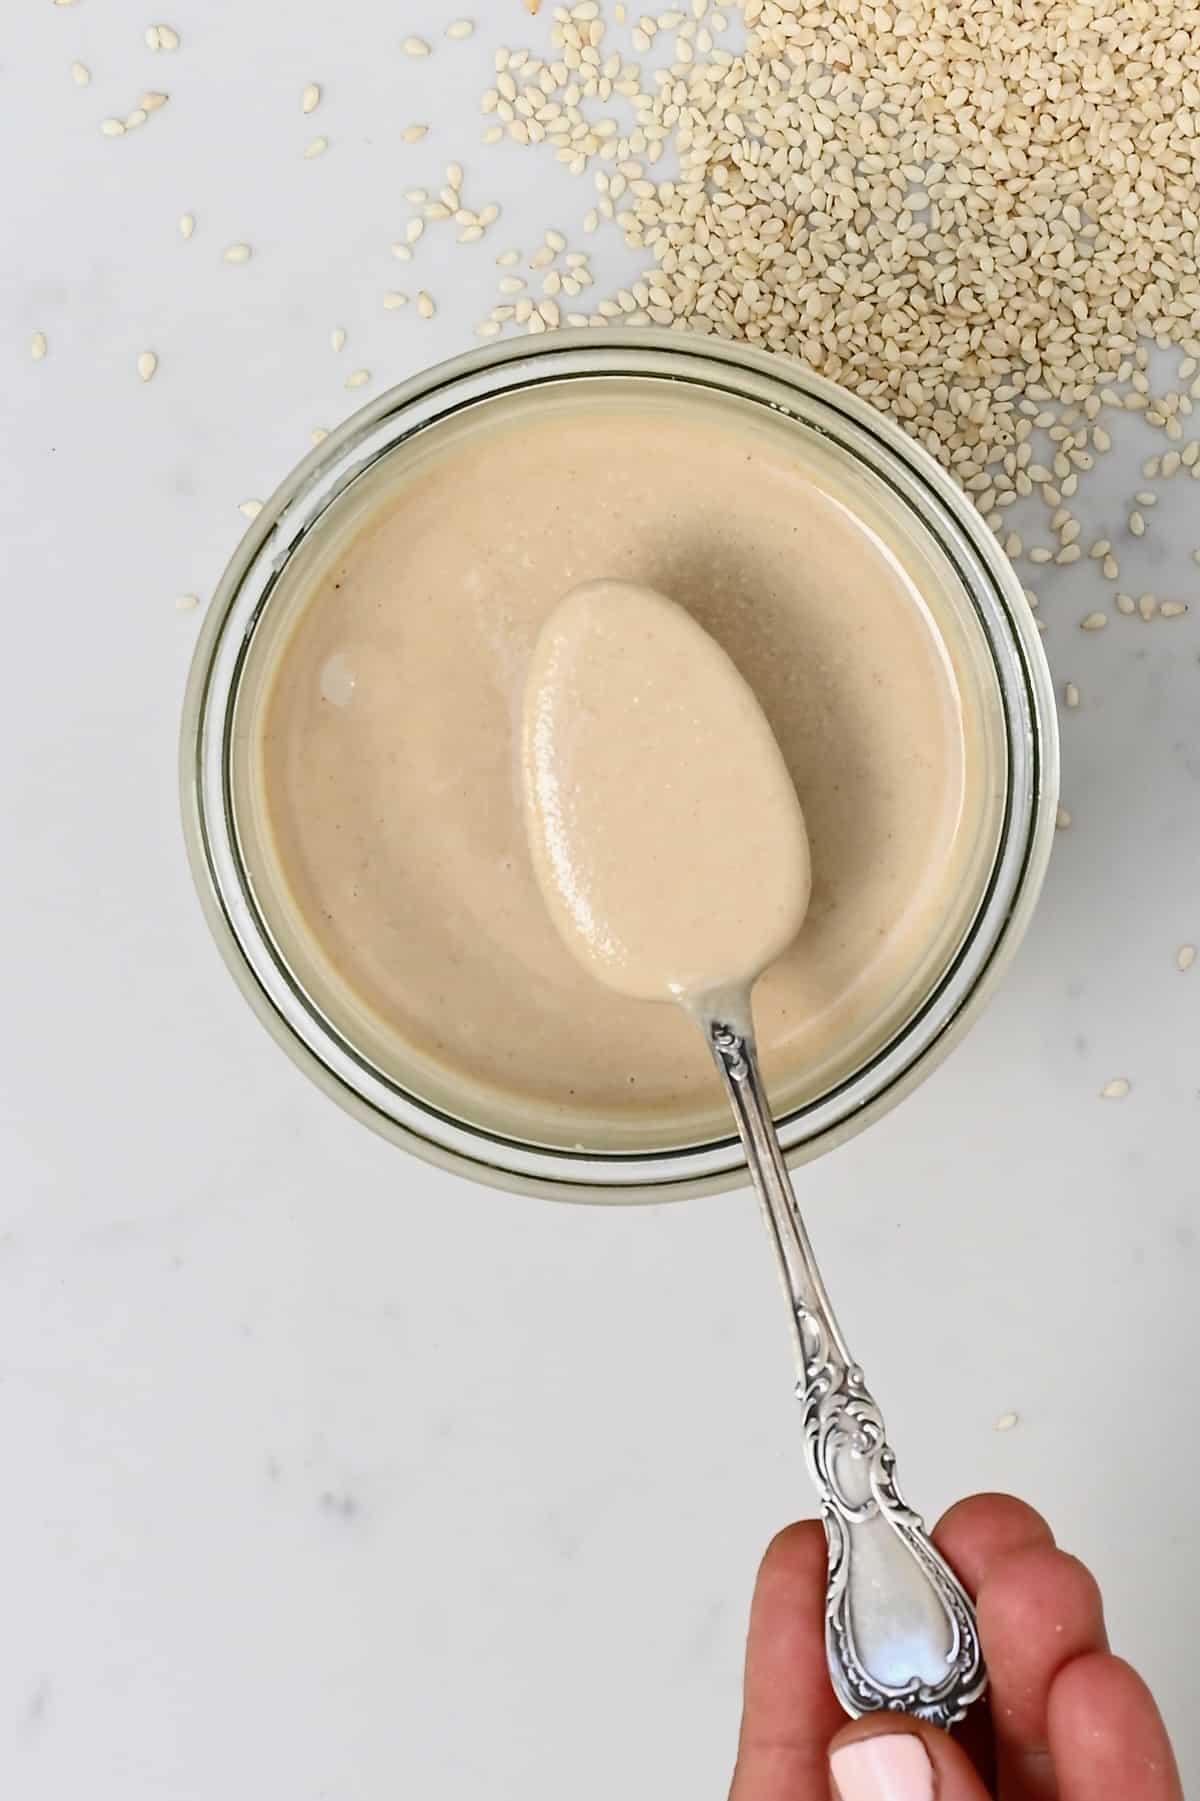 DIY Tahini: Elevate Your Recipes with Homemade Sesame Seed Paste